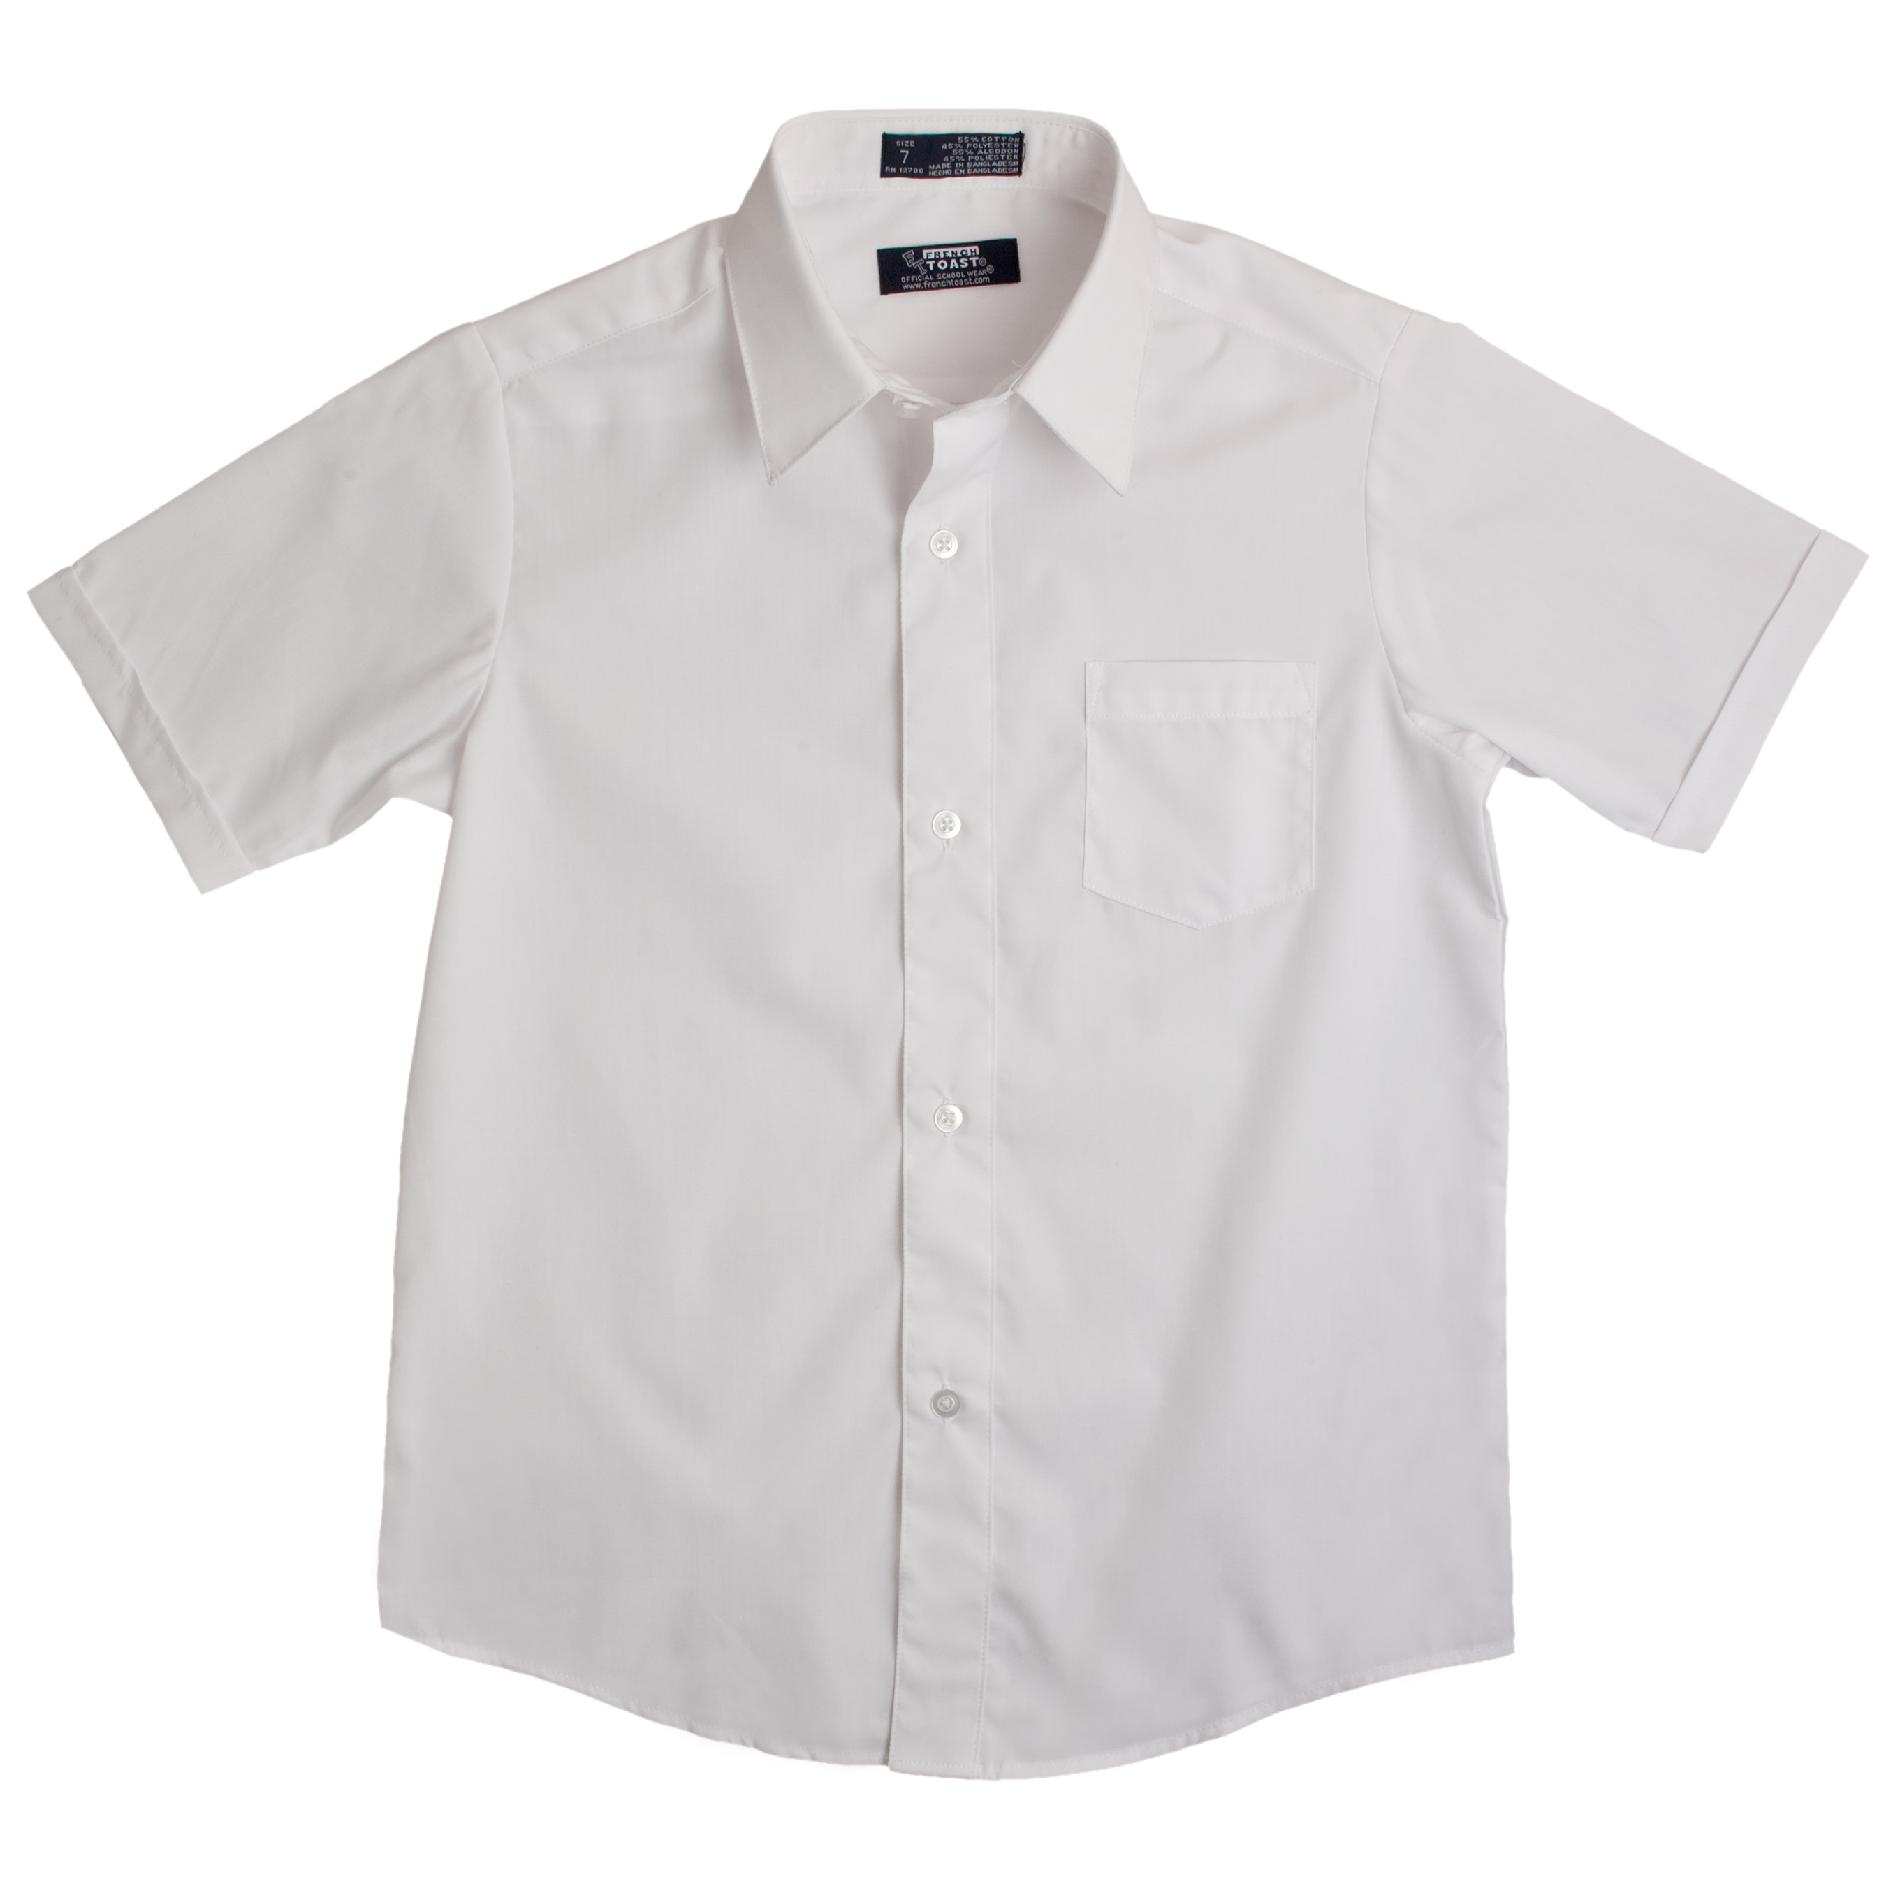 Young Men's Short Sleeve Dress Shirt with Expandable Collar